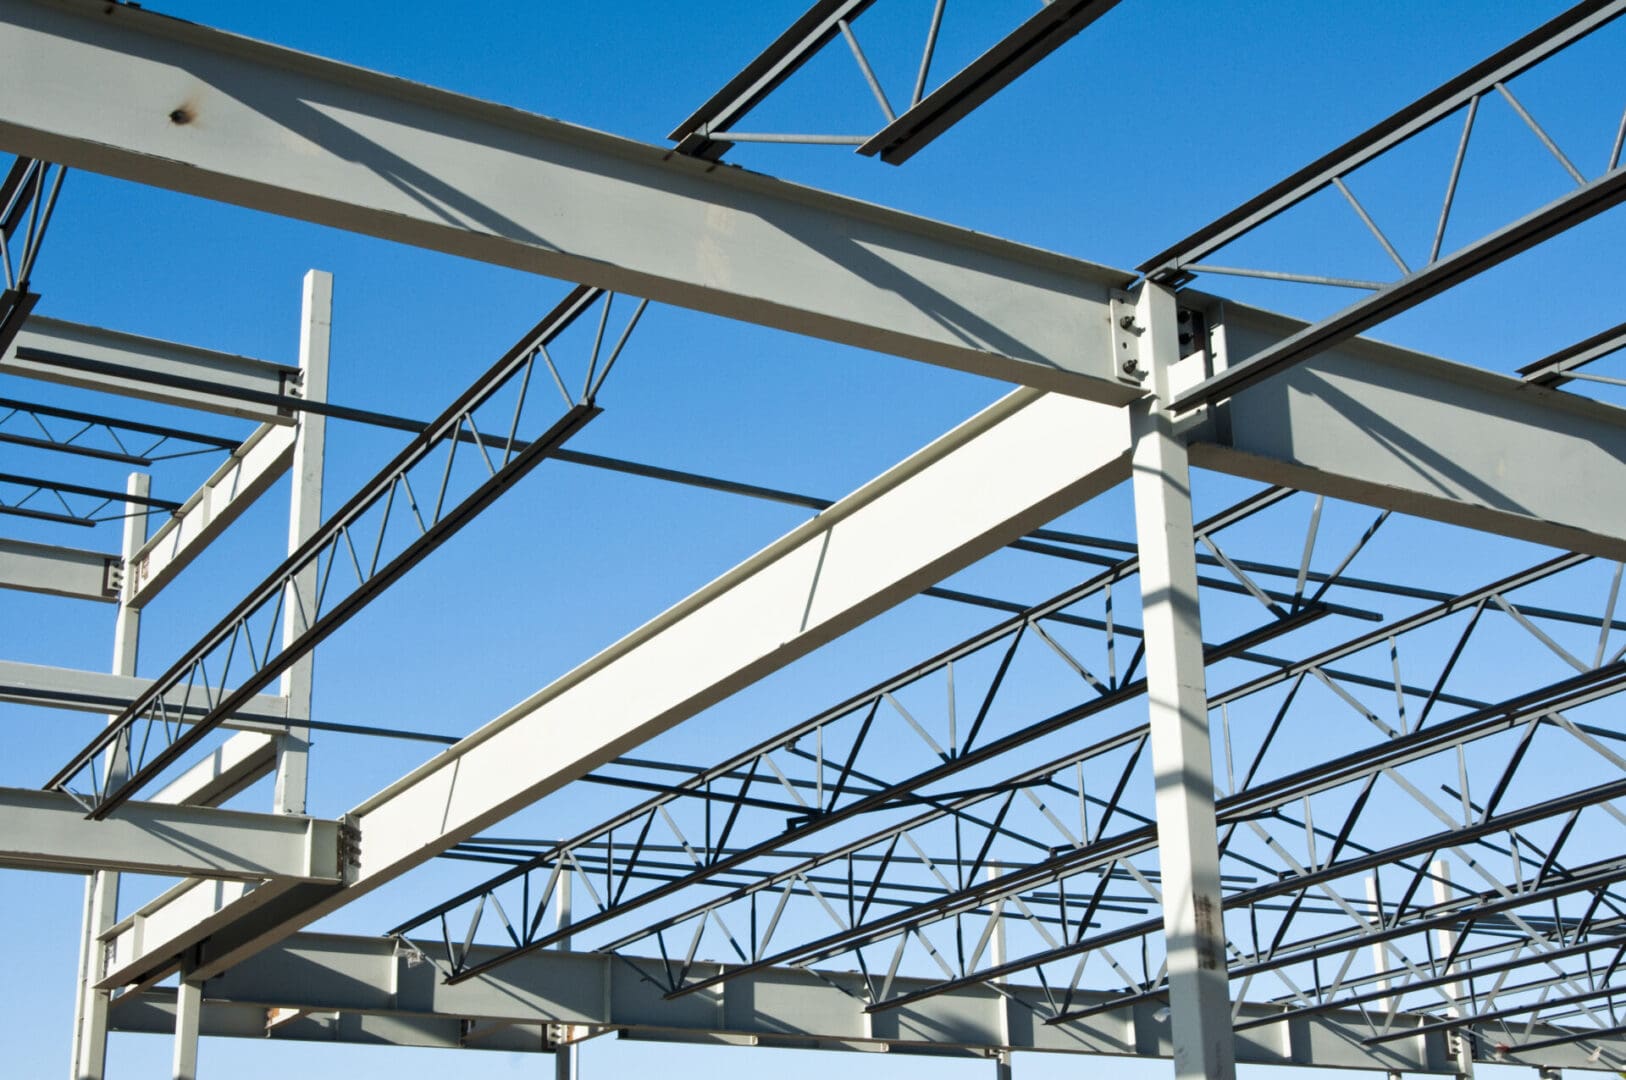 A steel structure with beams and supports for the roof.